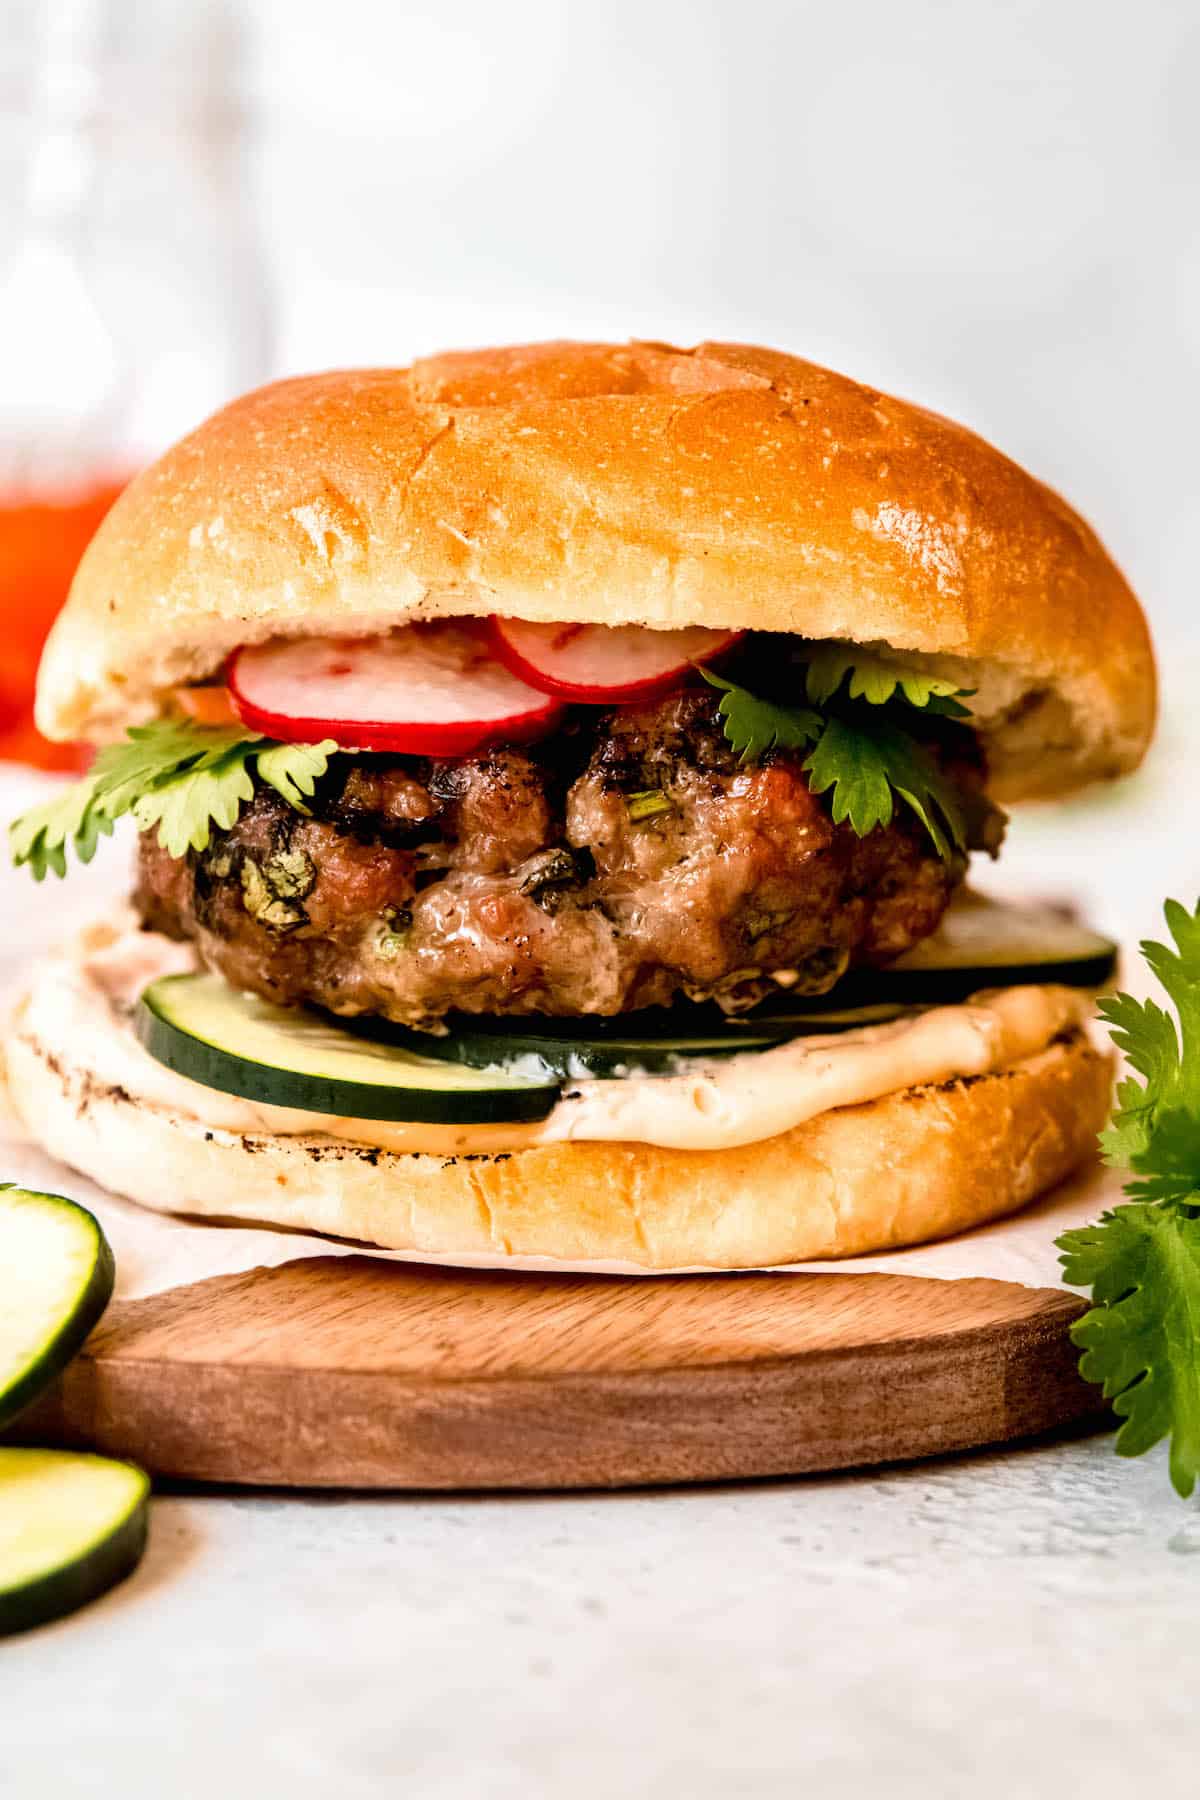 side-on view of an Asian pork burger showing the toasted bun, spicy mayo, fresh cucumber slices, green onion-flecked grilled pork patty, pickled banh mi veggies, and fresh cilantro all layered together.